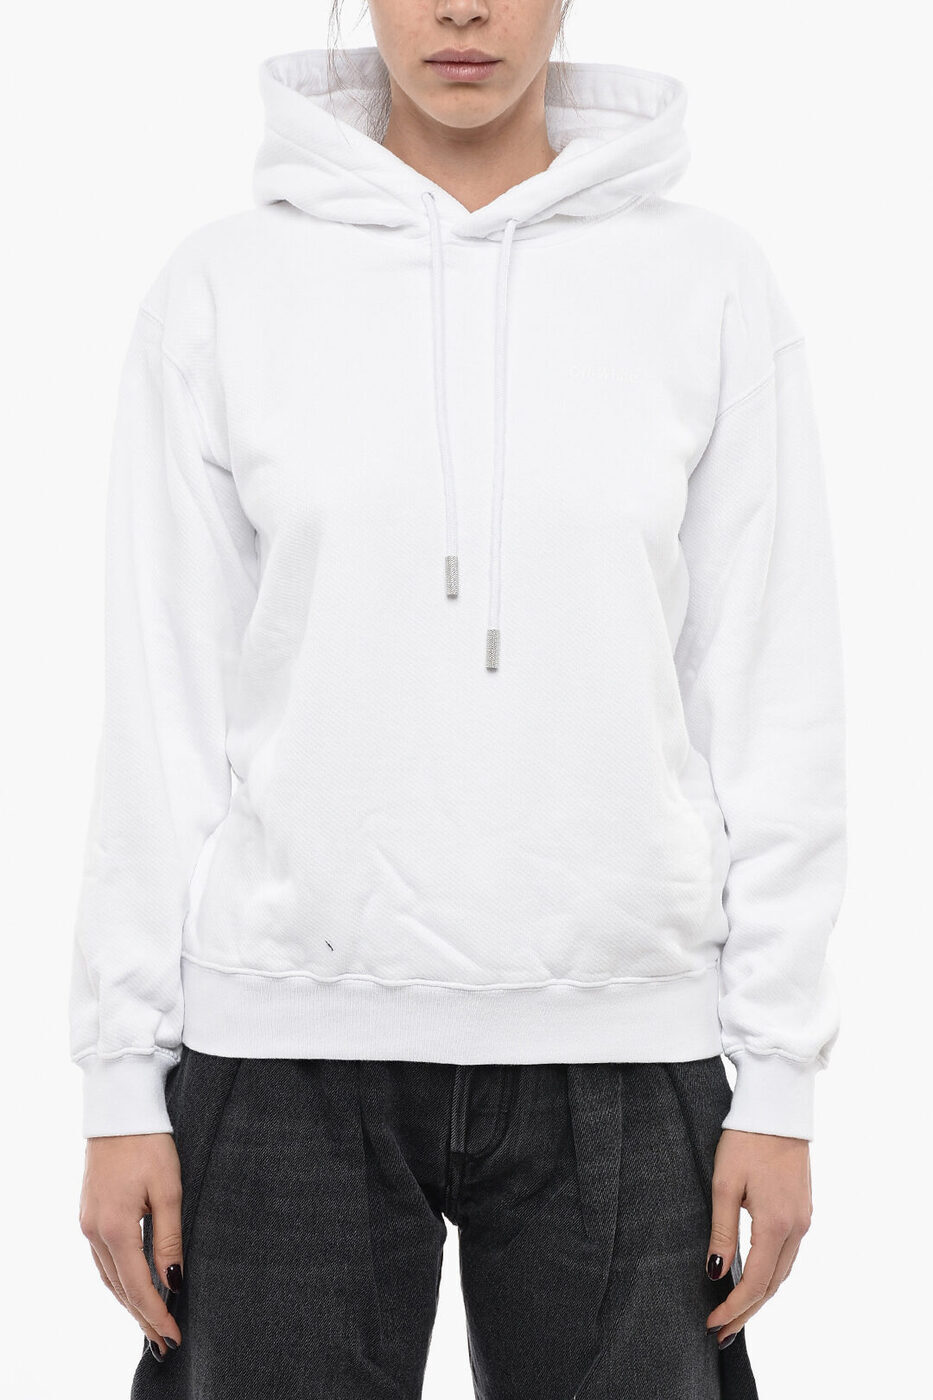 OFF WHITE オフホワイト トレーナー OWBB032C99JER0010101 レディース BRUSHED COTTON HOODIE WITH TONE ON TONE PRINT 【関税・送料無料】【ラッピング無料】 dk